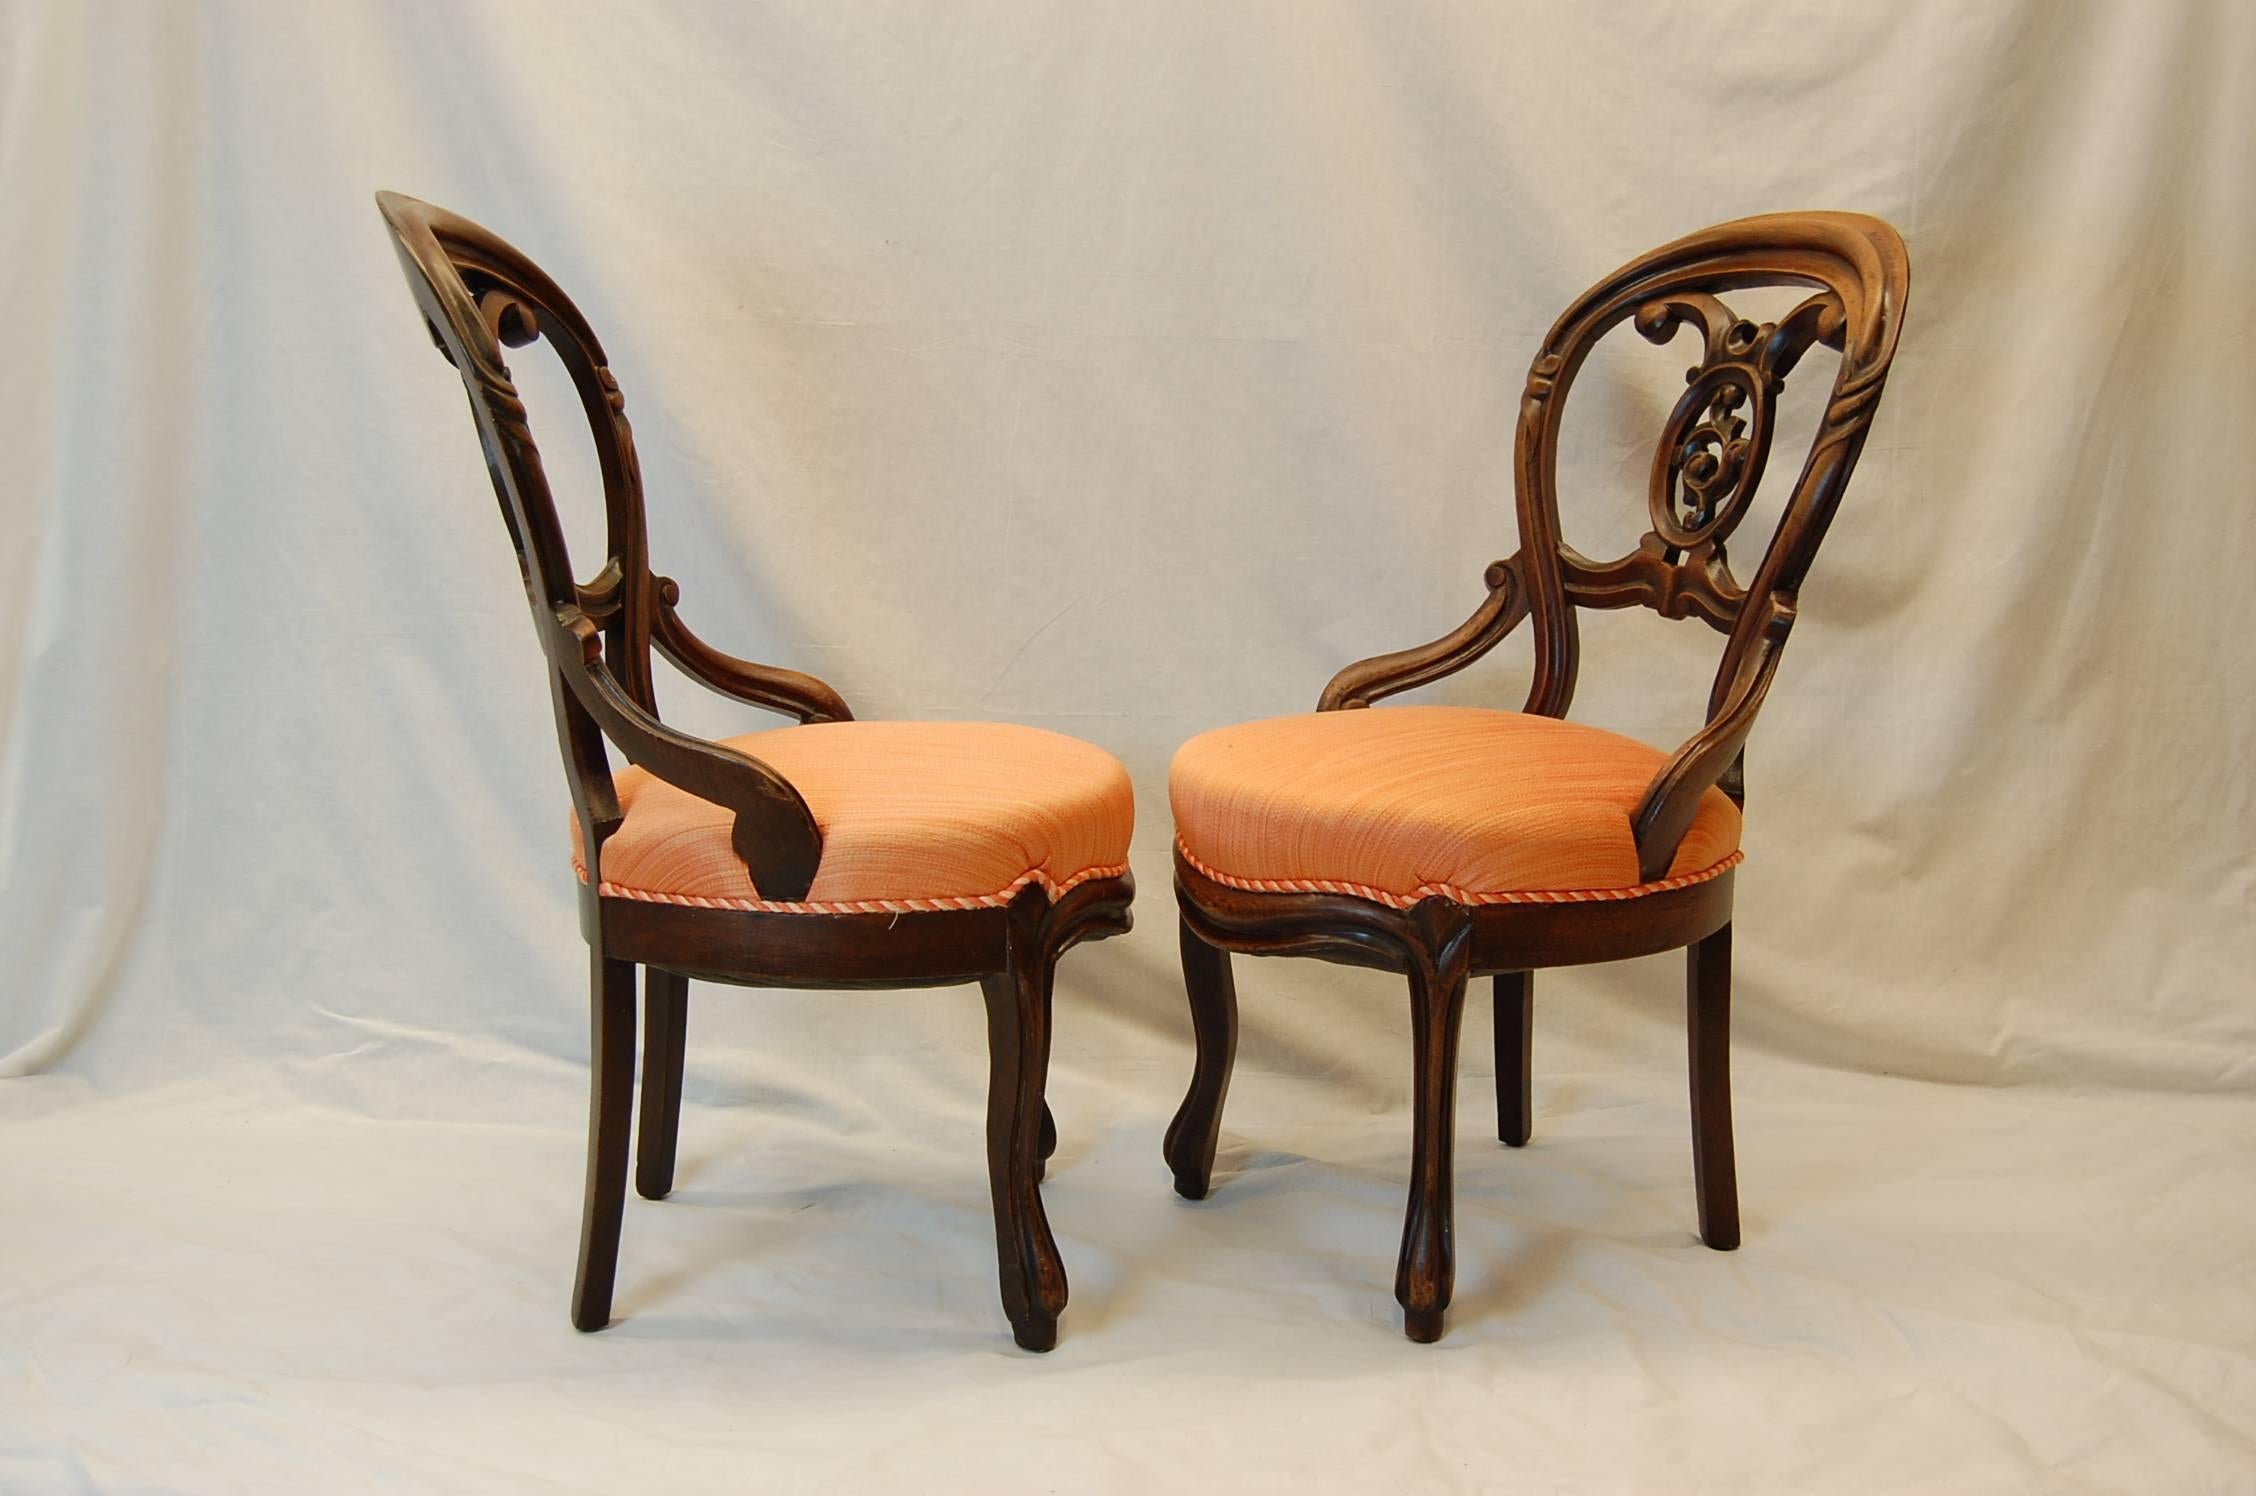 American Pair Victorian Walnut Carved Parlor Chairs, circa 1870